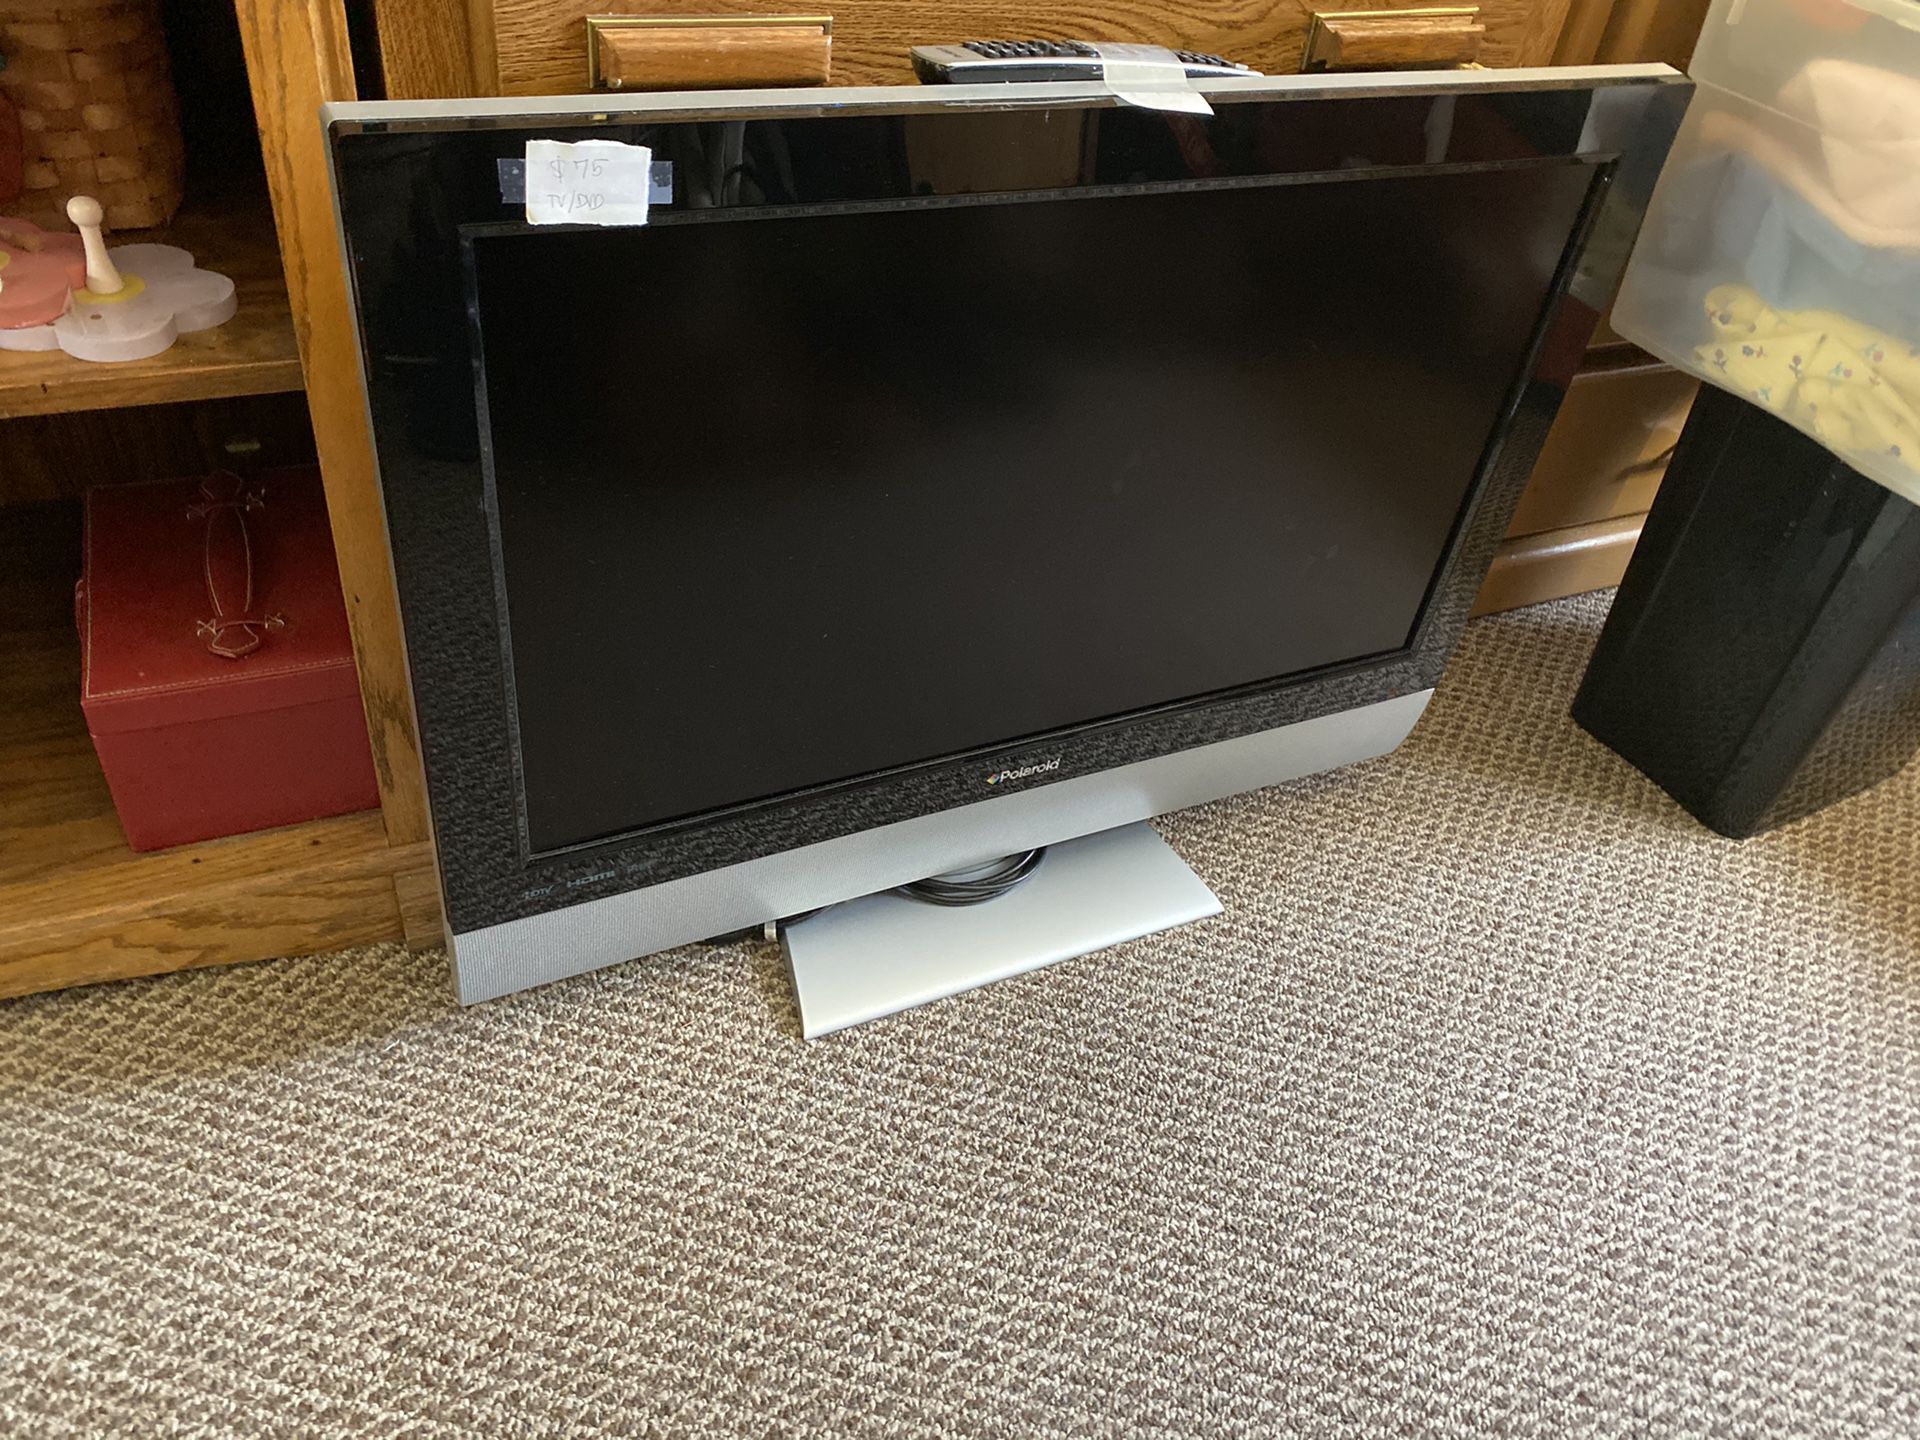 Vizio tv with built-in DVD player